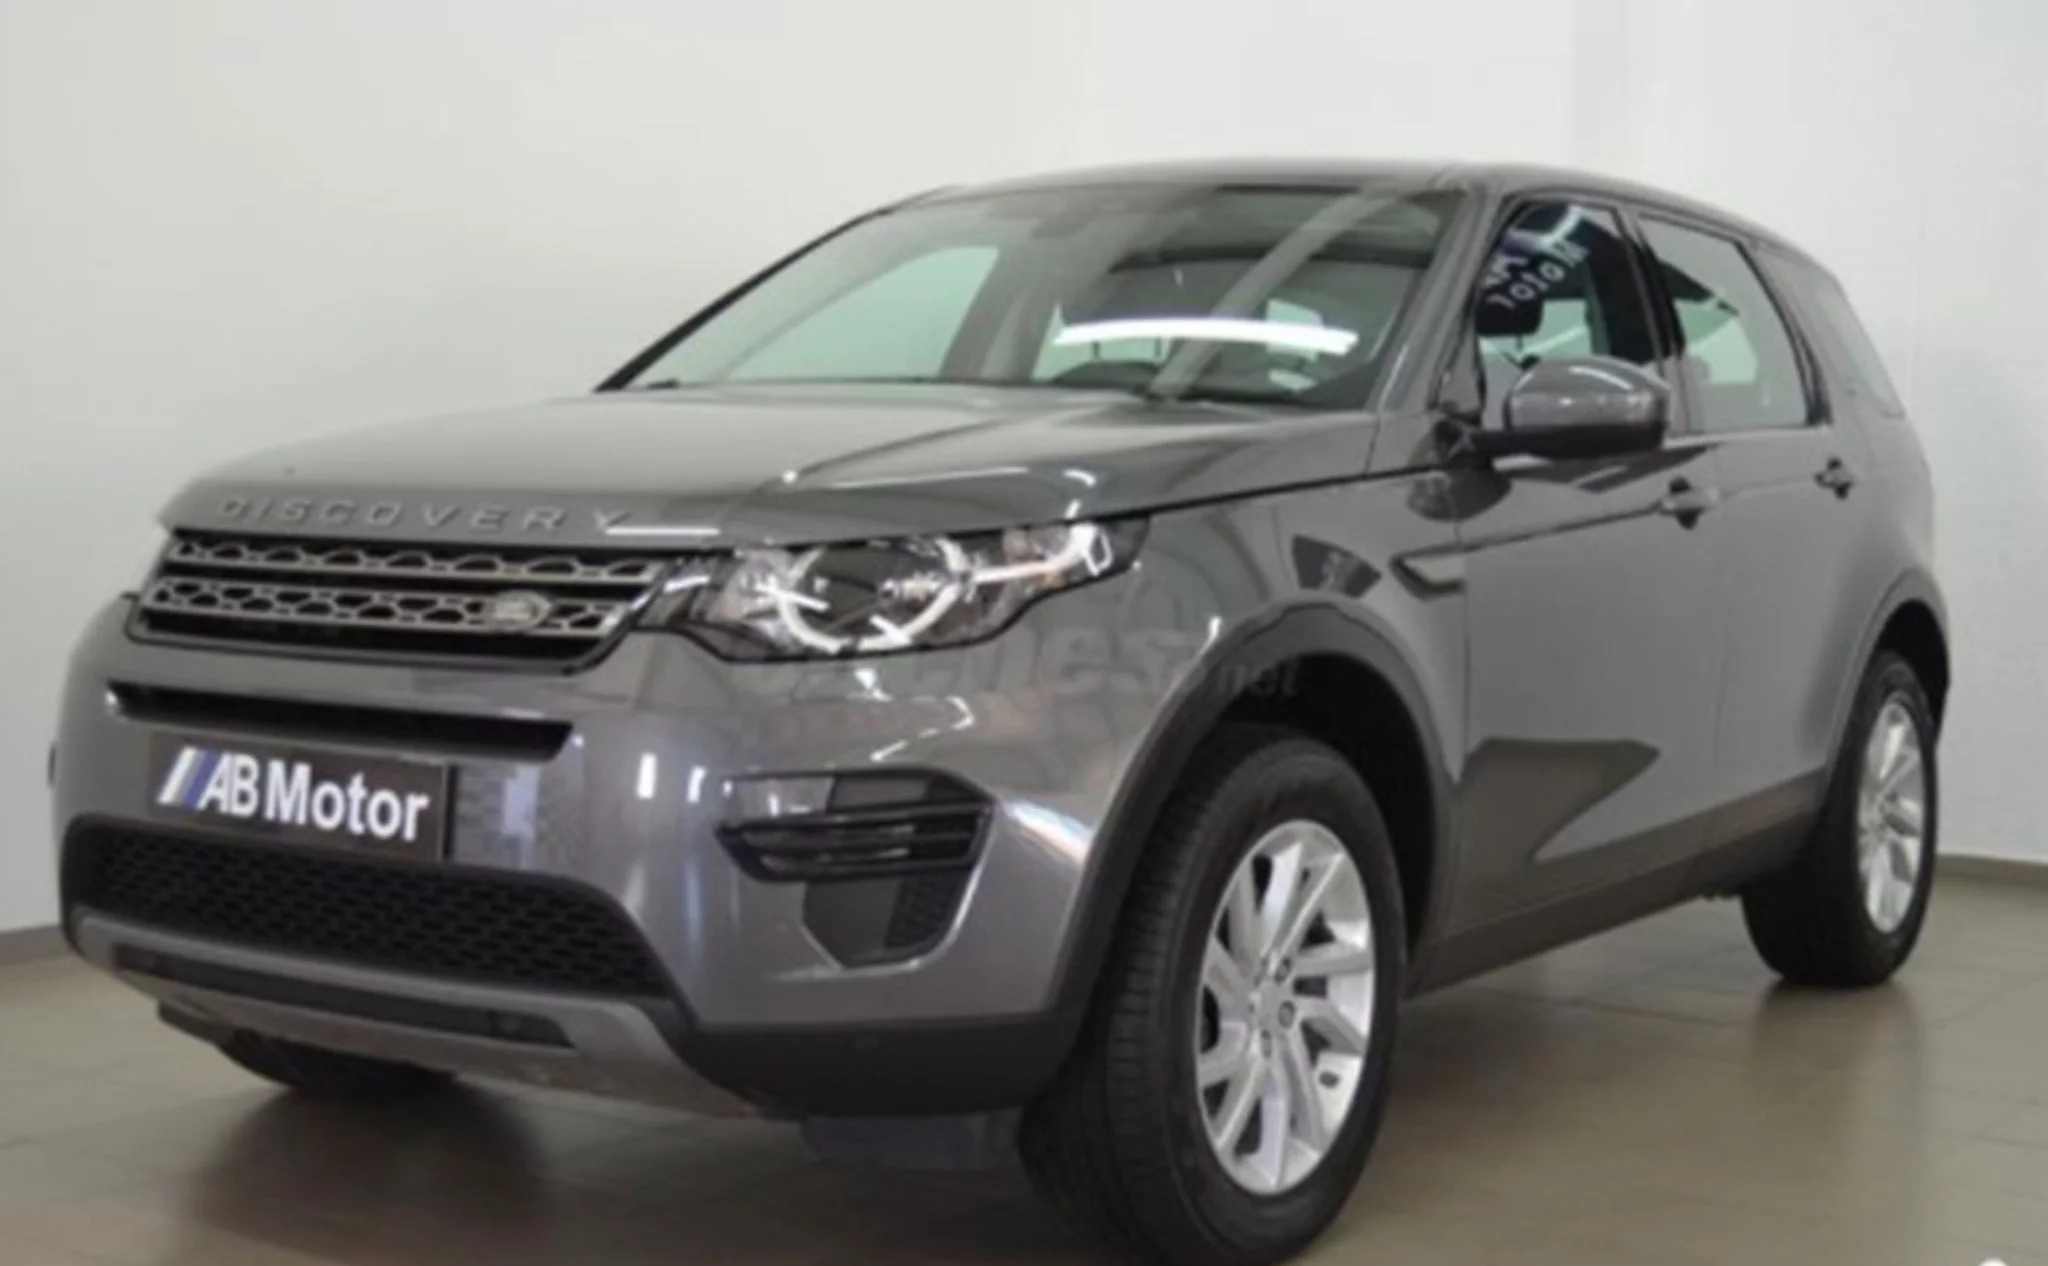 Land Rover Discovery Sport 2.0 L – AB Motor